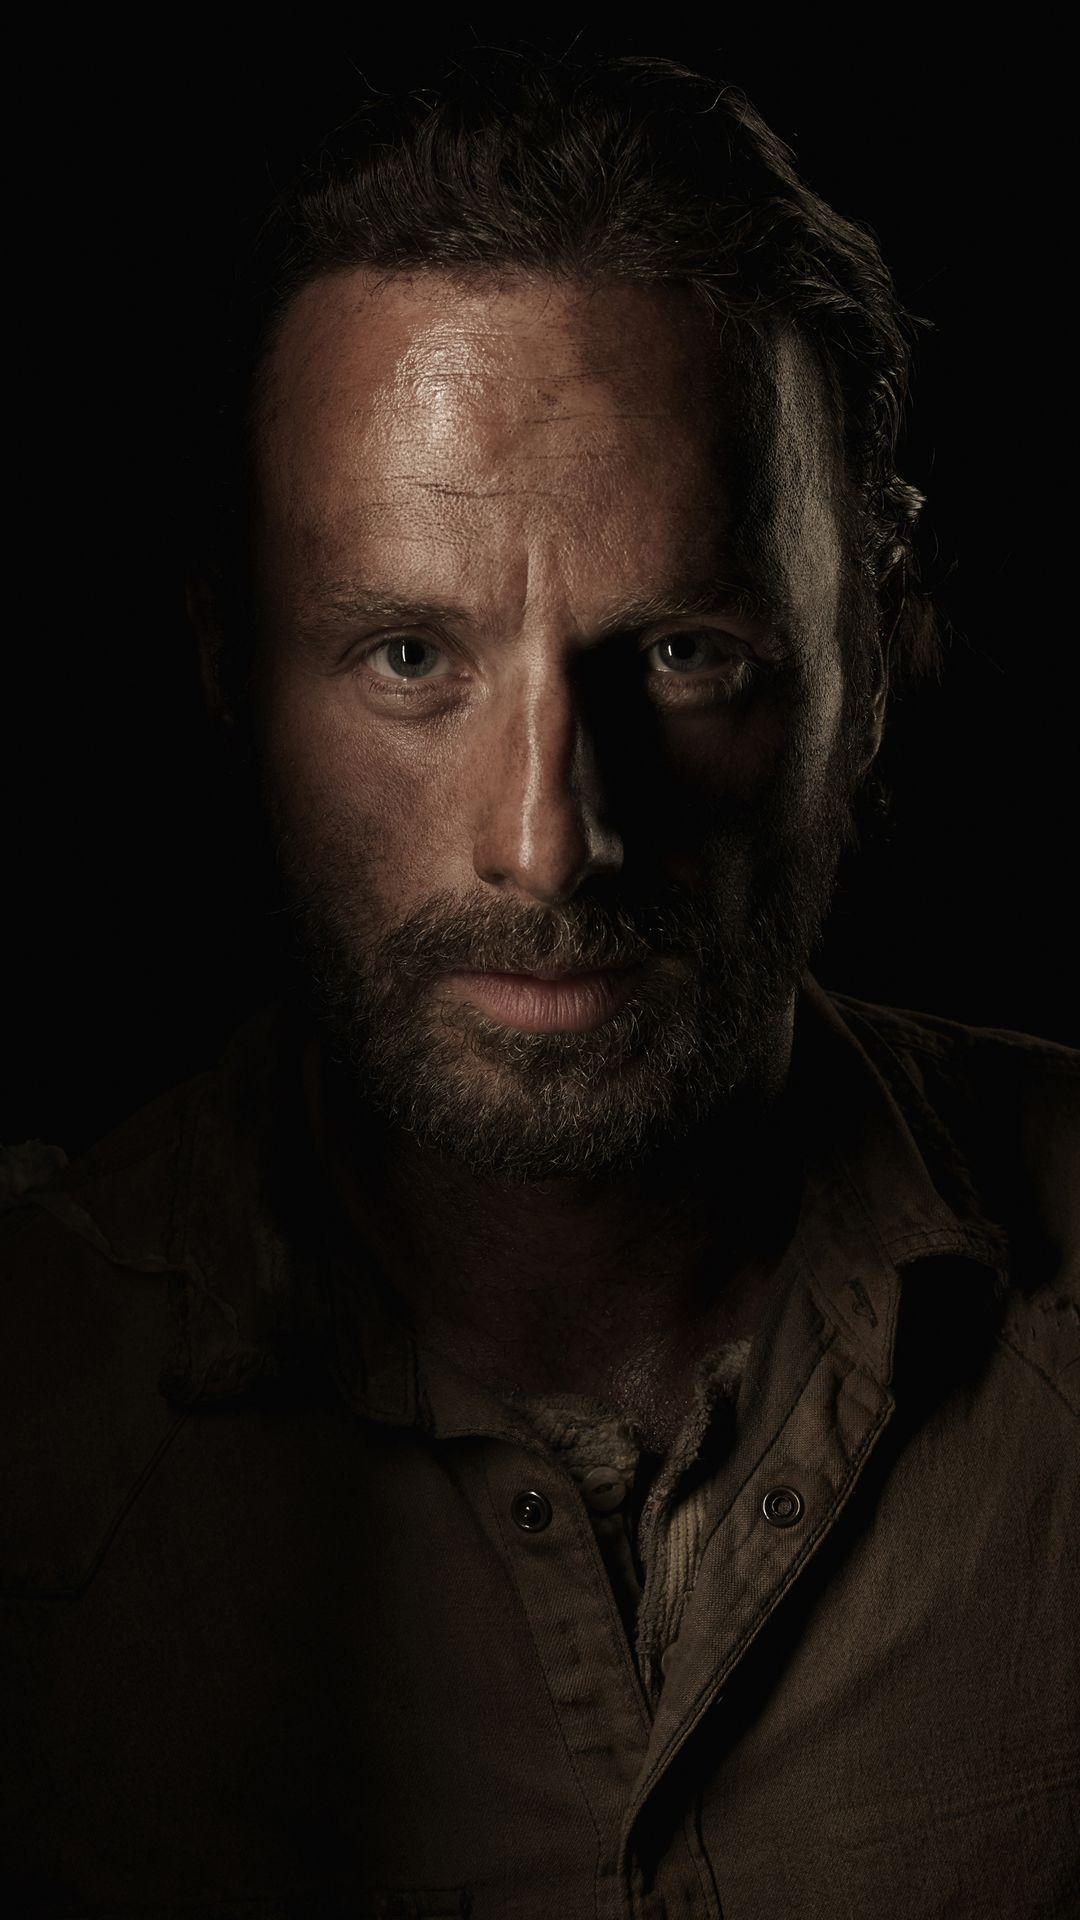 The walking dead Andrew Lincoln htc one wallpaper, free